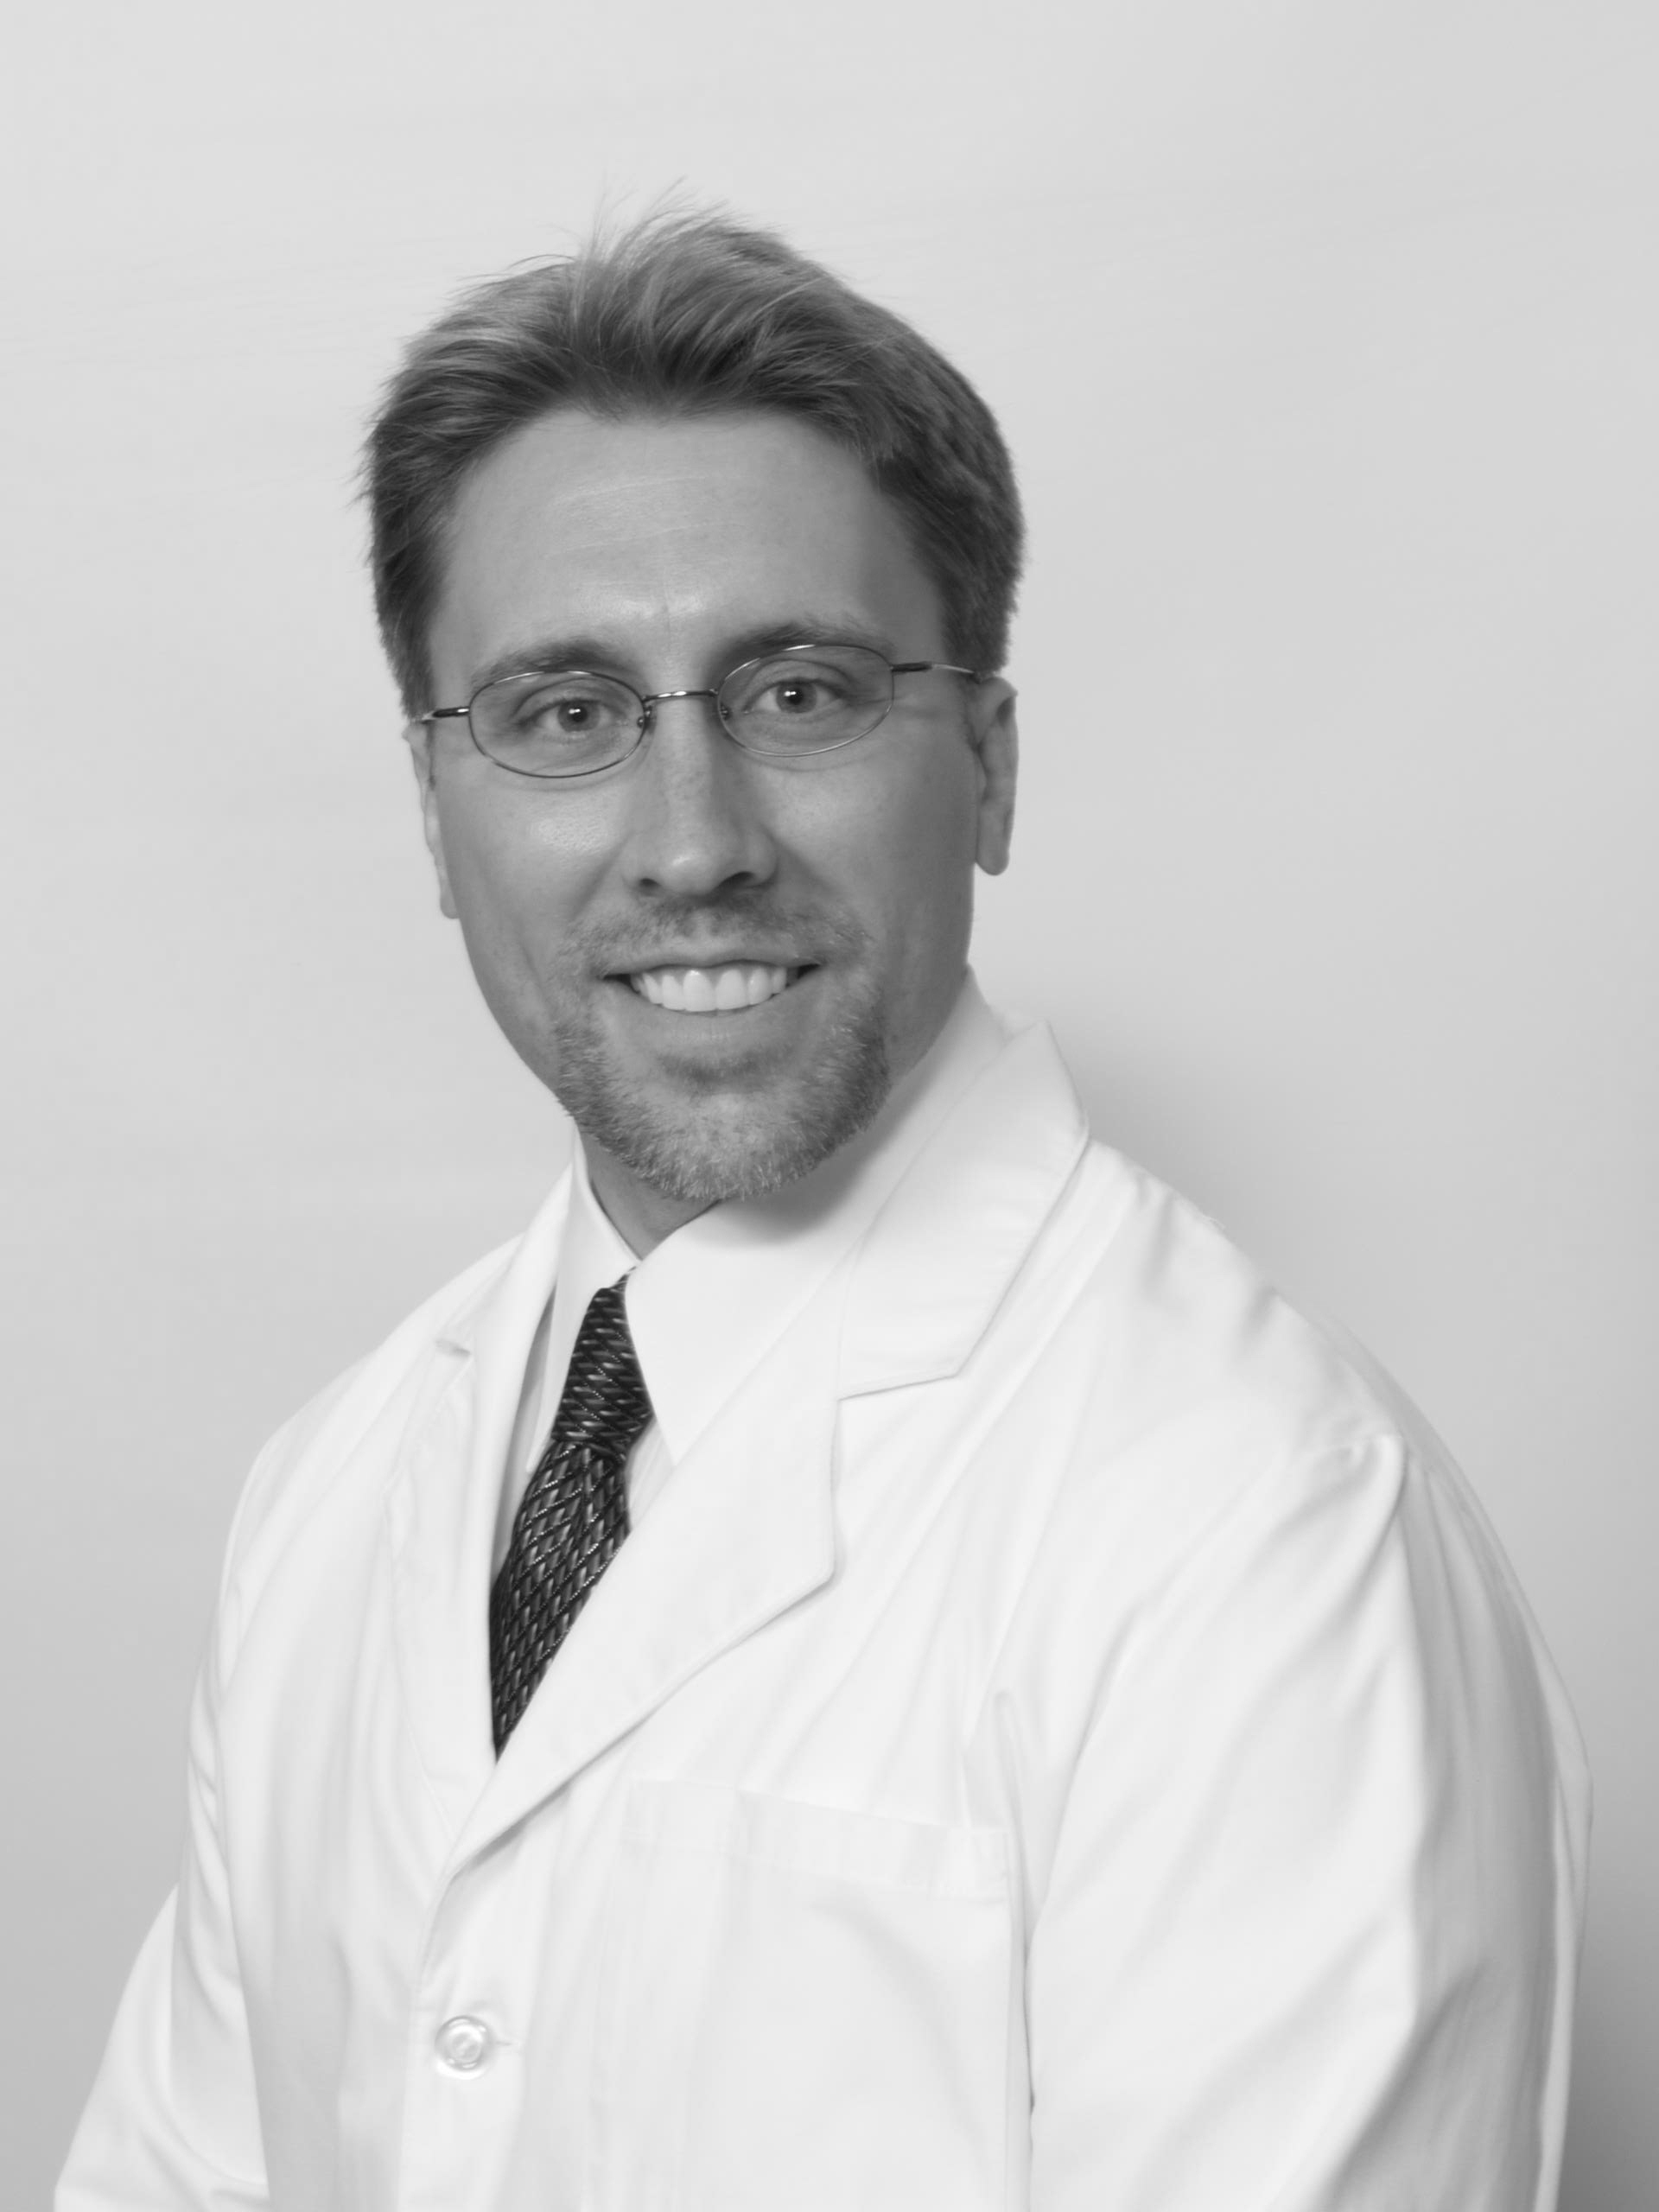 Dr. Eric Anderson, Board Certified Chiropractic Physician